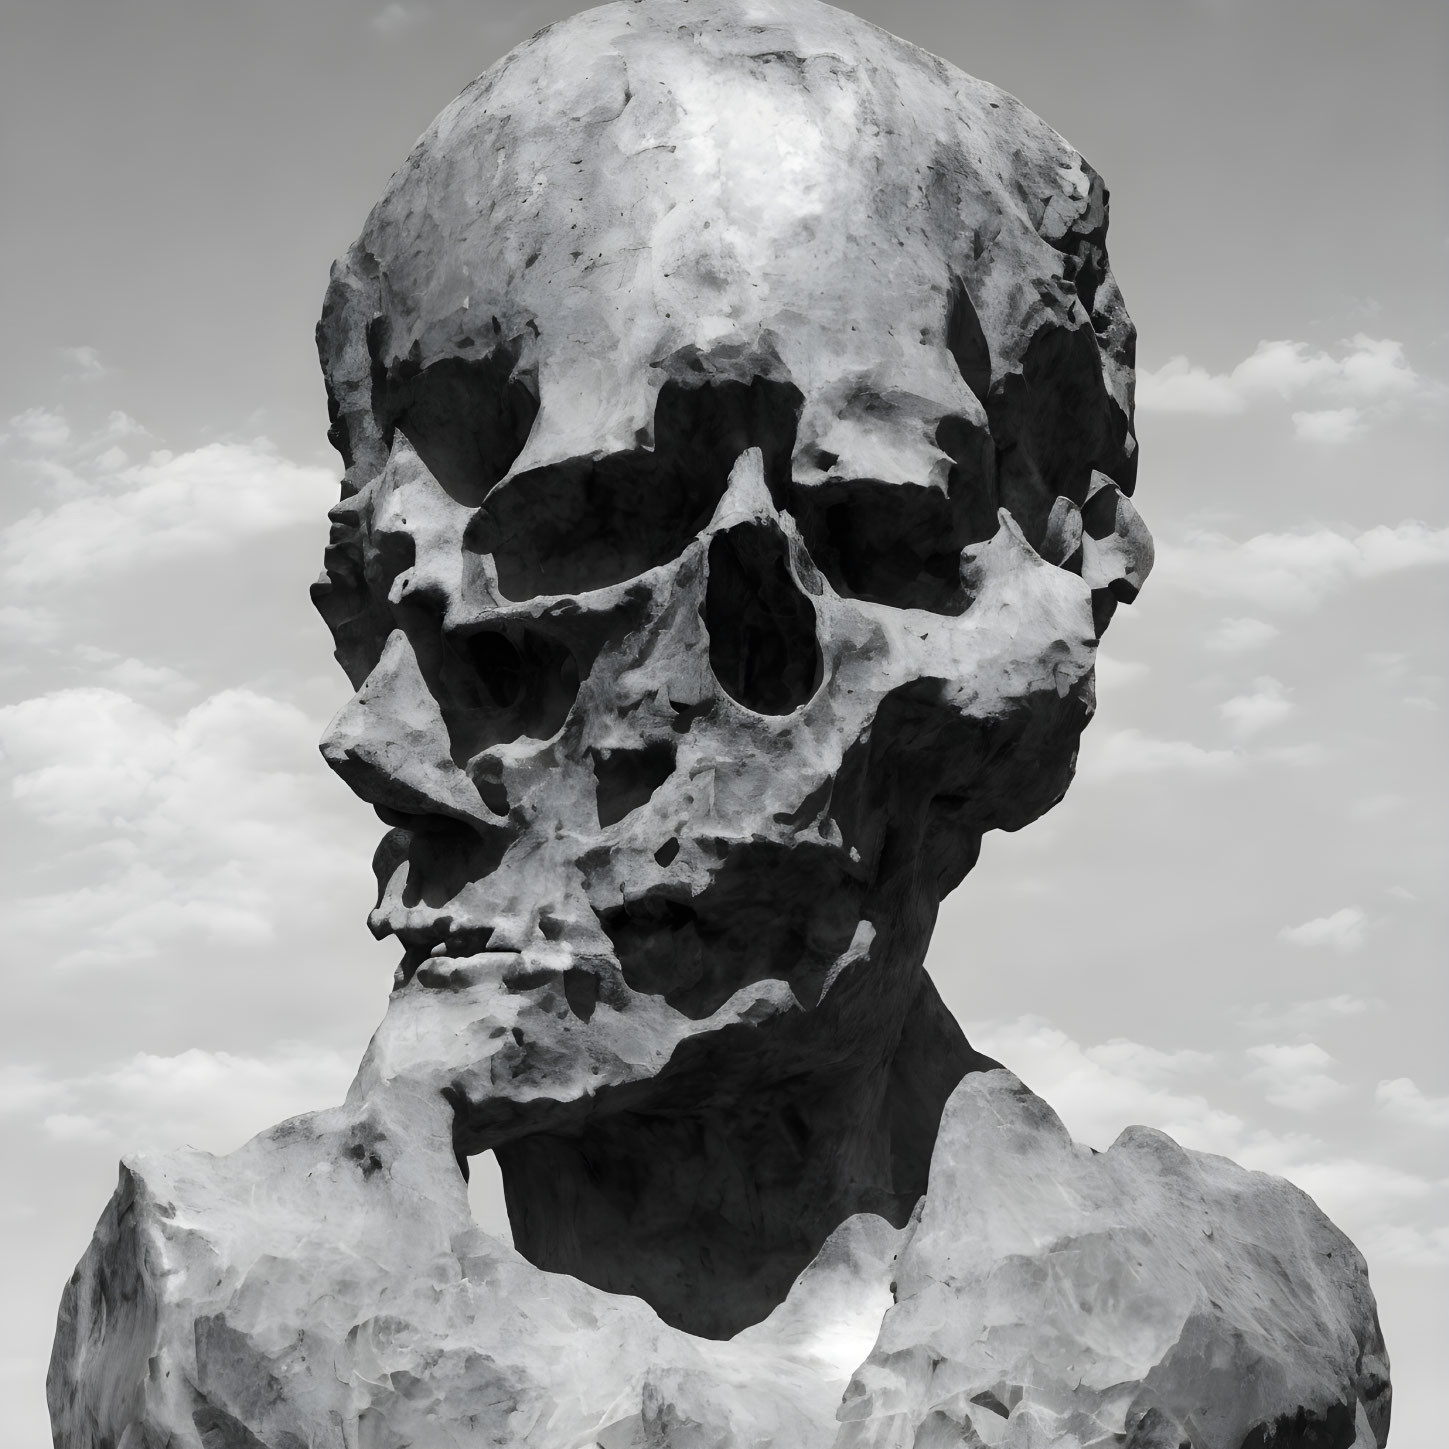 Large Textured Human Skull Sculpture Against Cloudy Sky